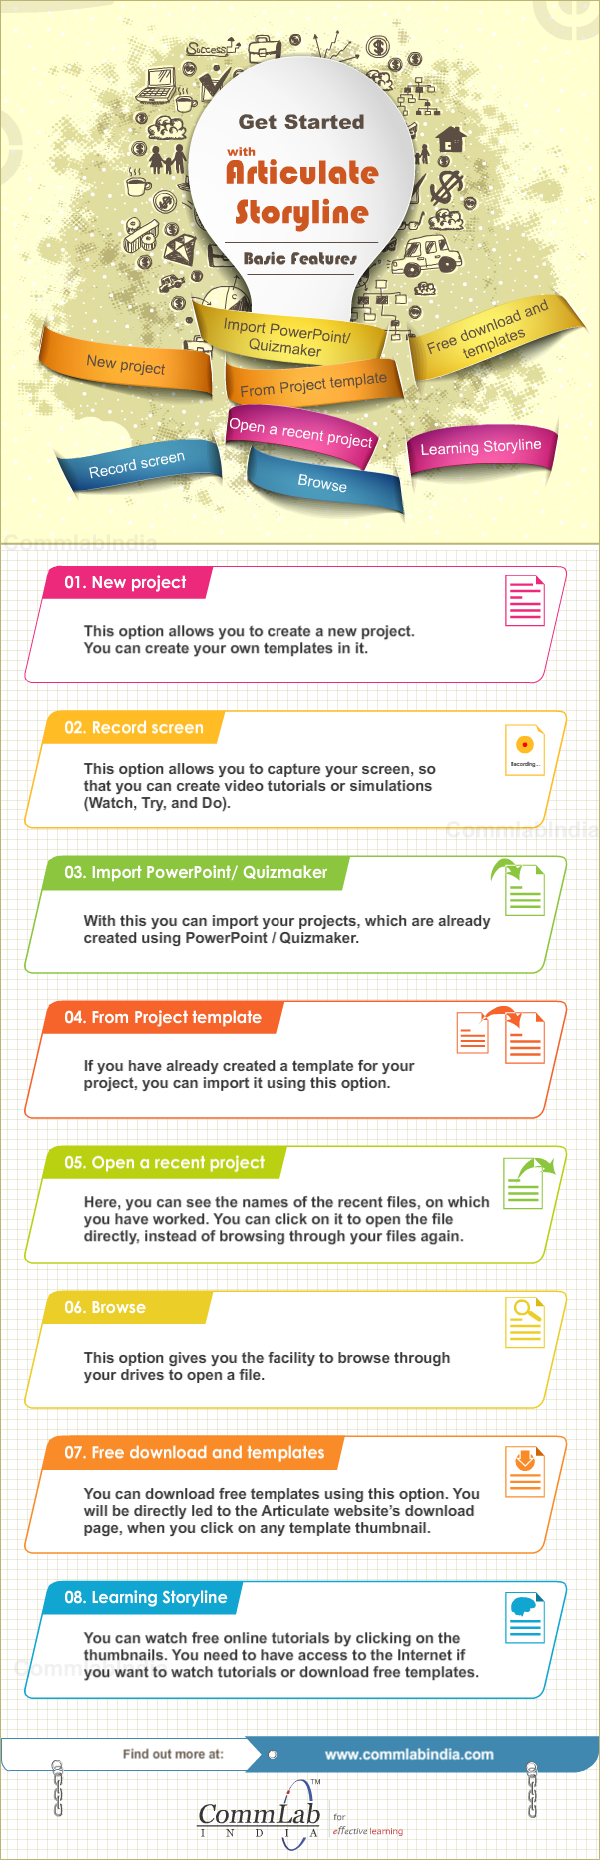 Getting Started With Articulate Storyline [Infographic]